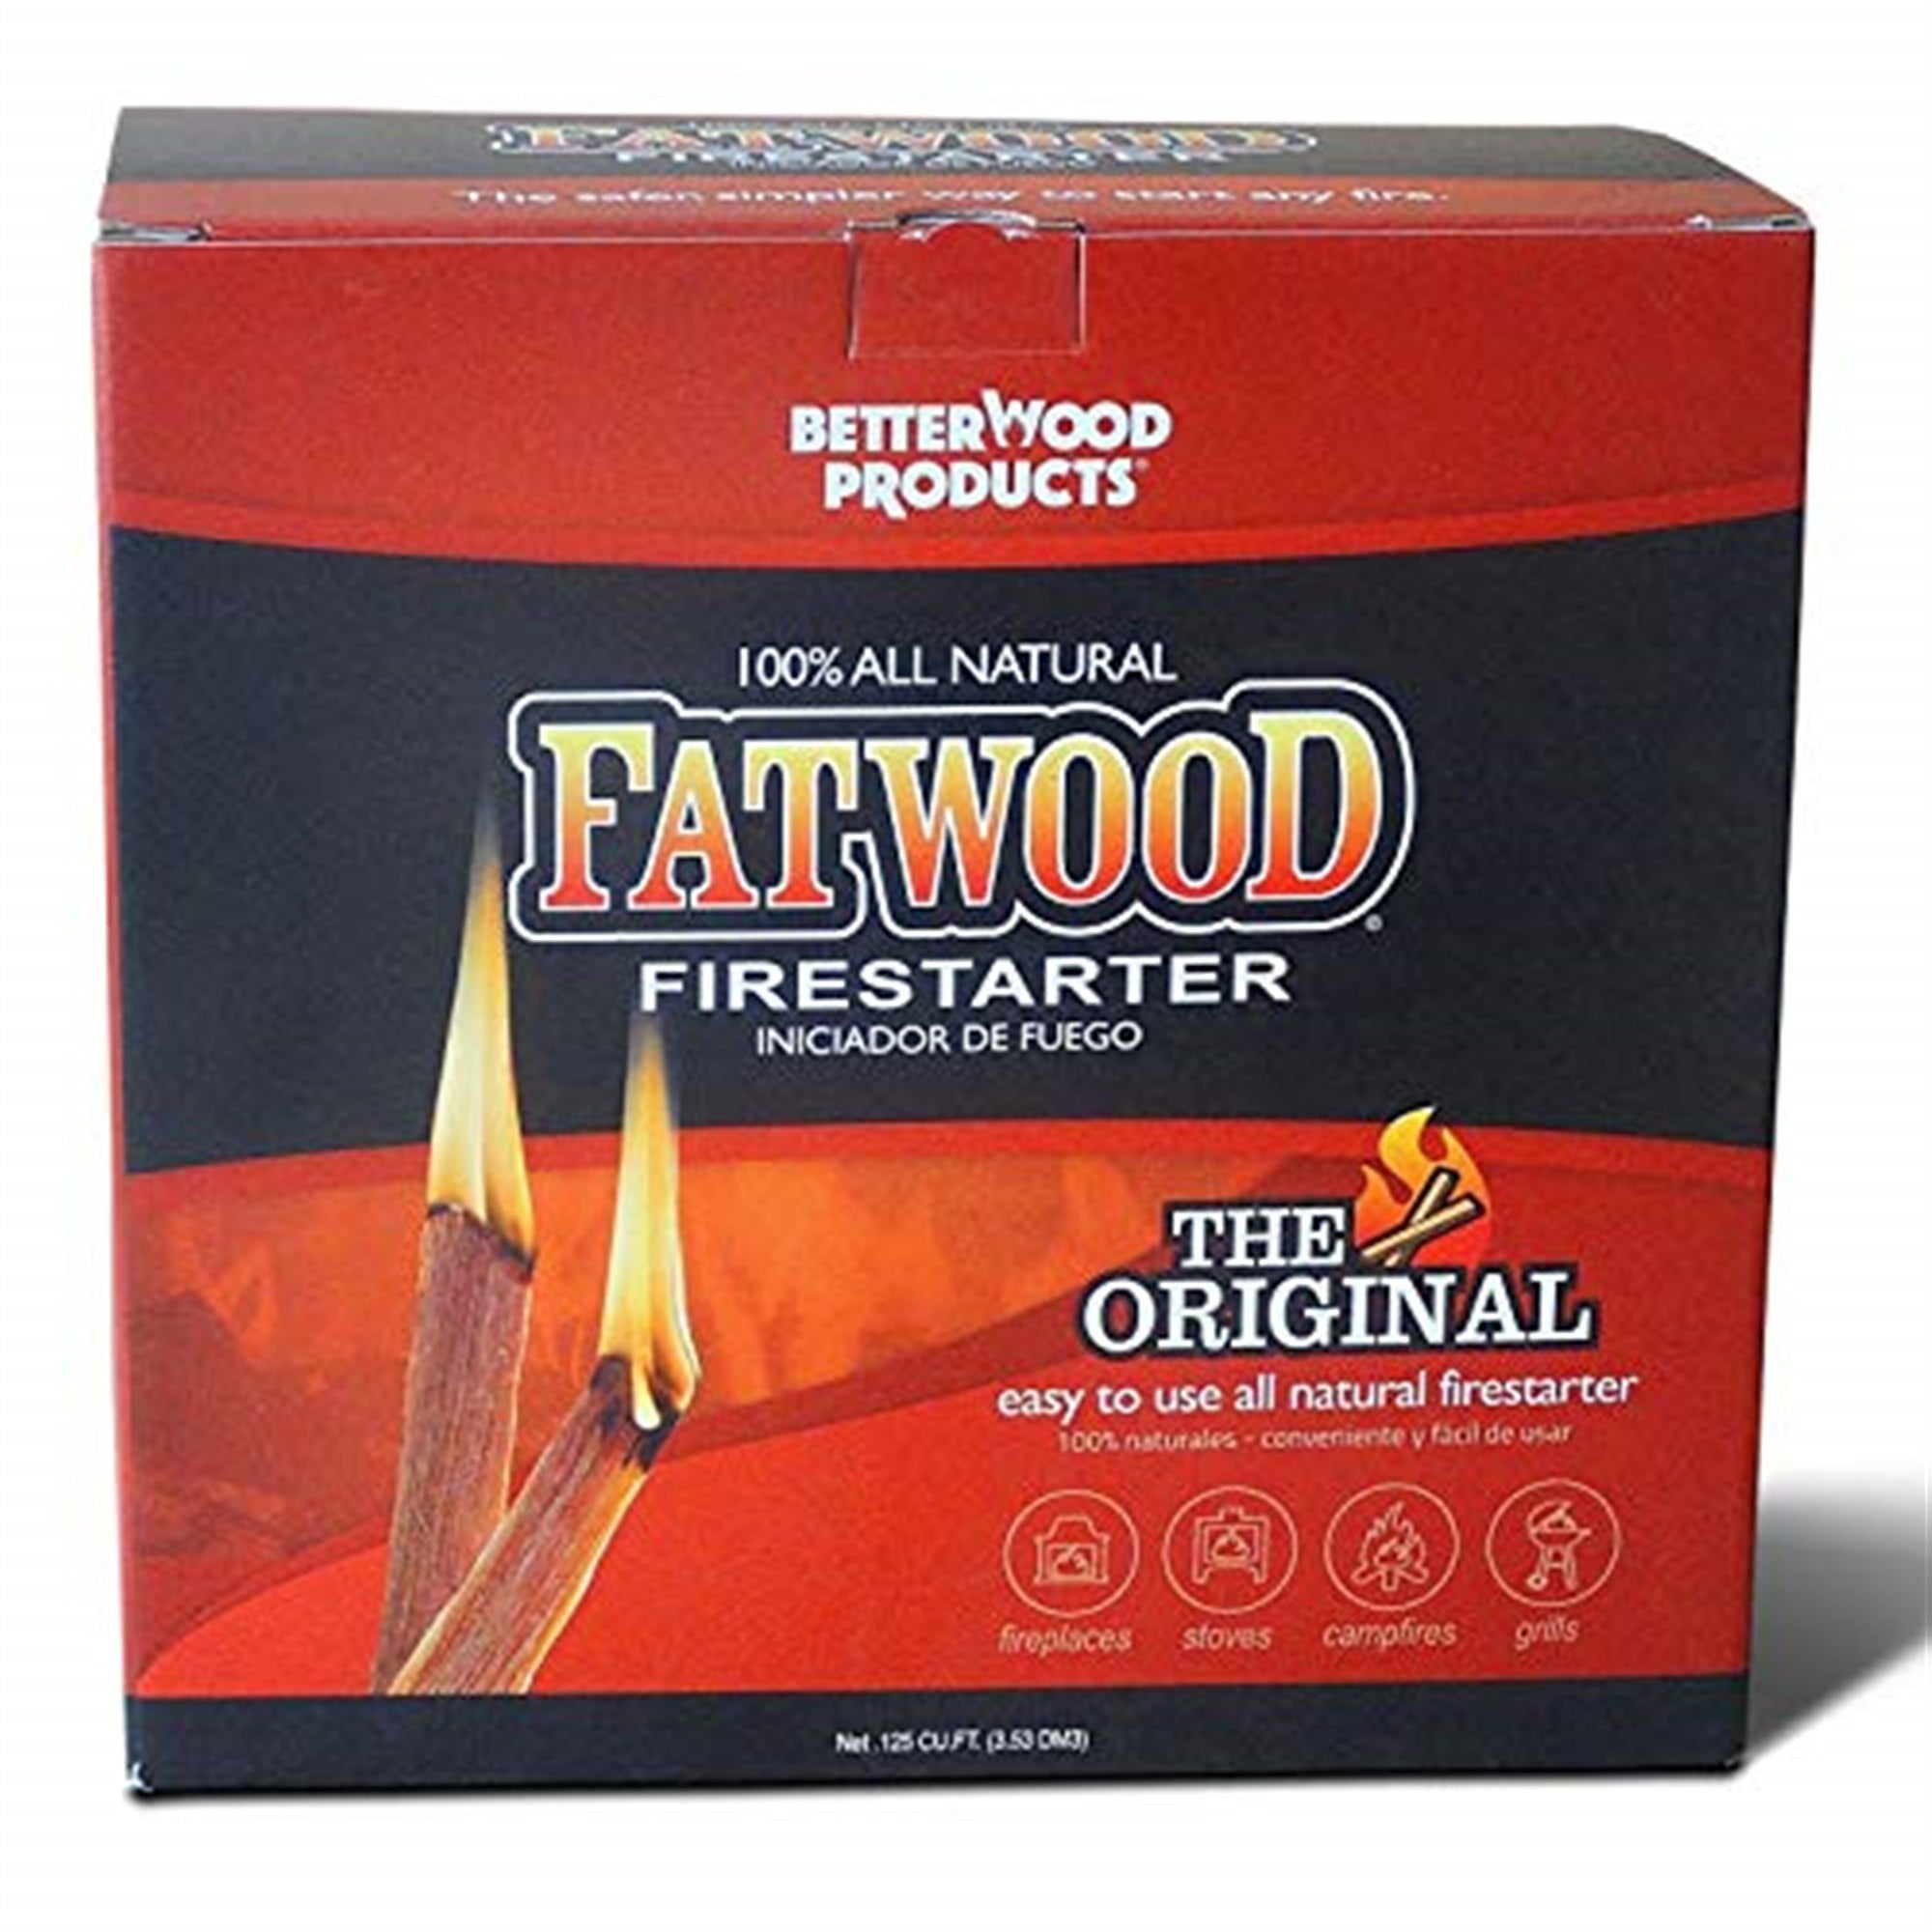 Better Wood Products Fatwood Firestarter Box, Non-Toxic, 10-Pounds